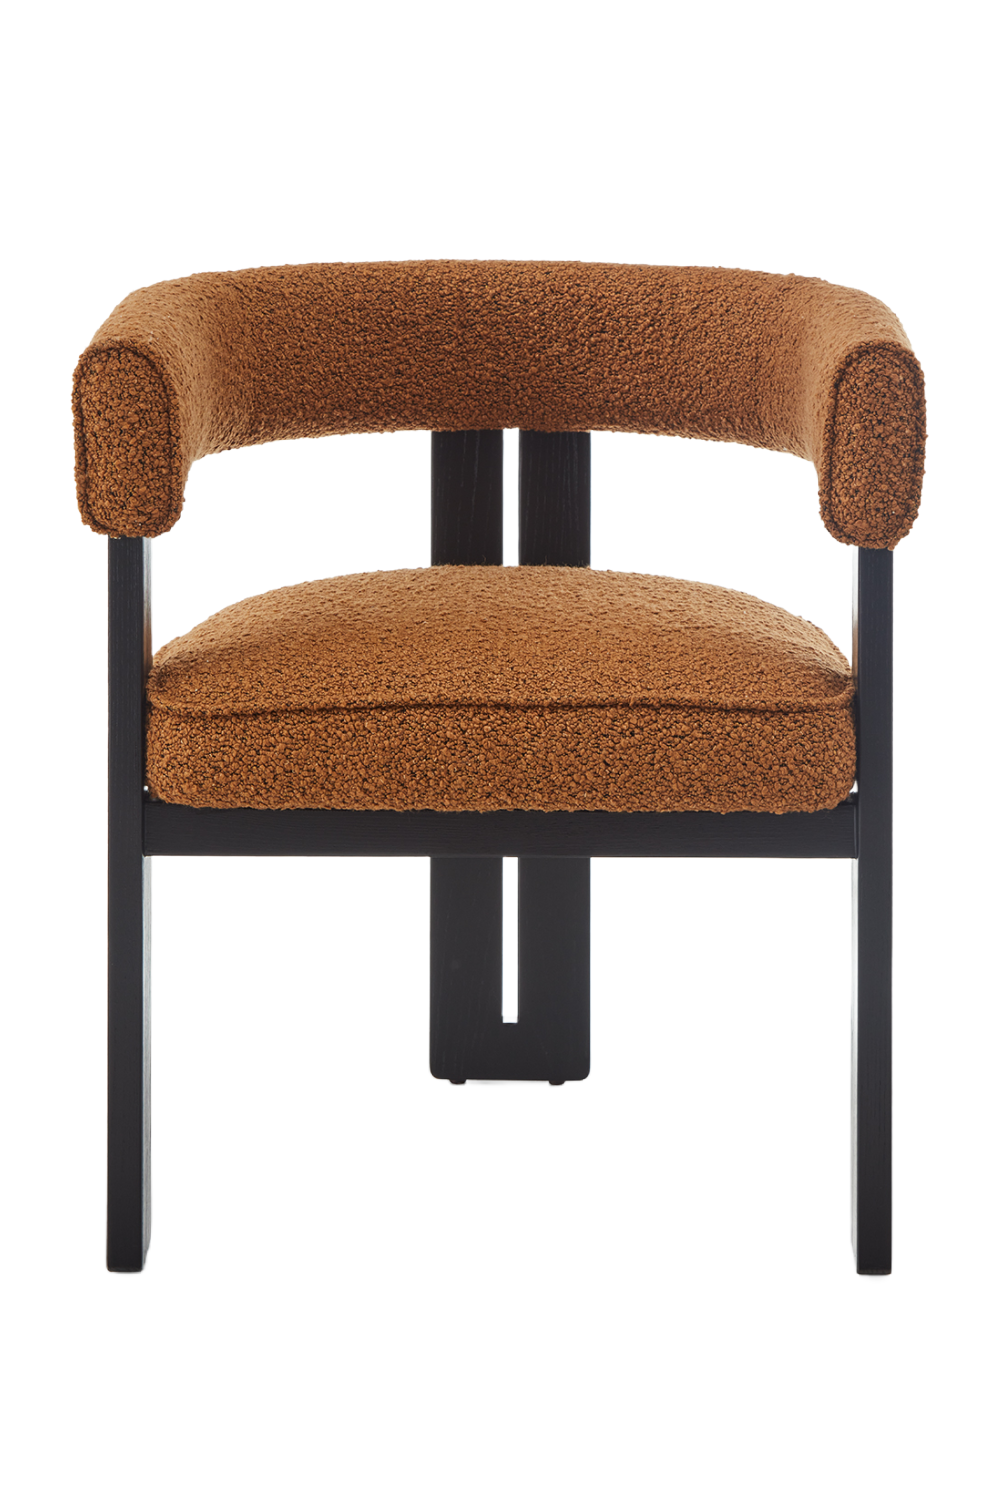 Image of Modern Classic Dining Chair | Liang & Eimil Tilda